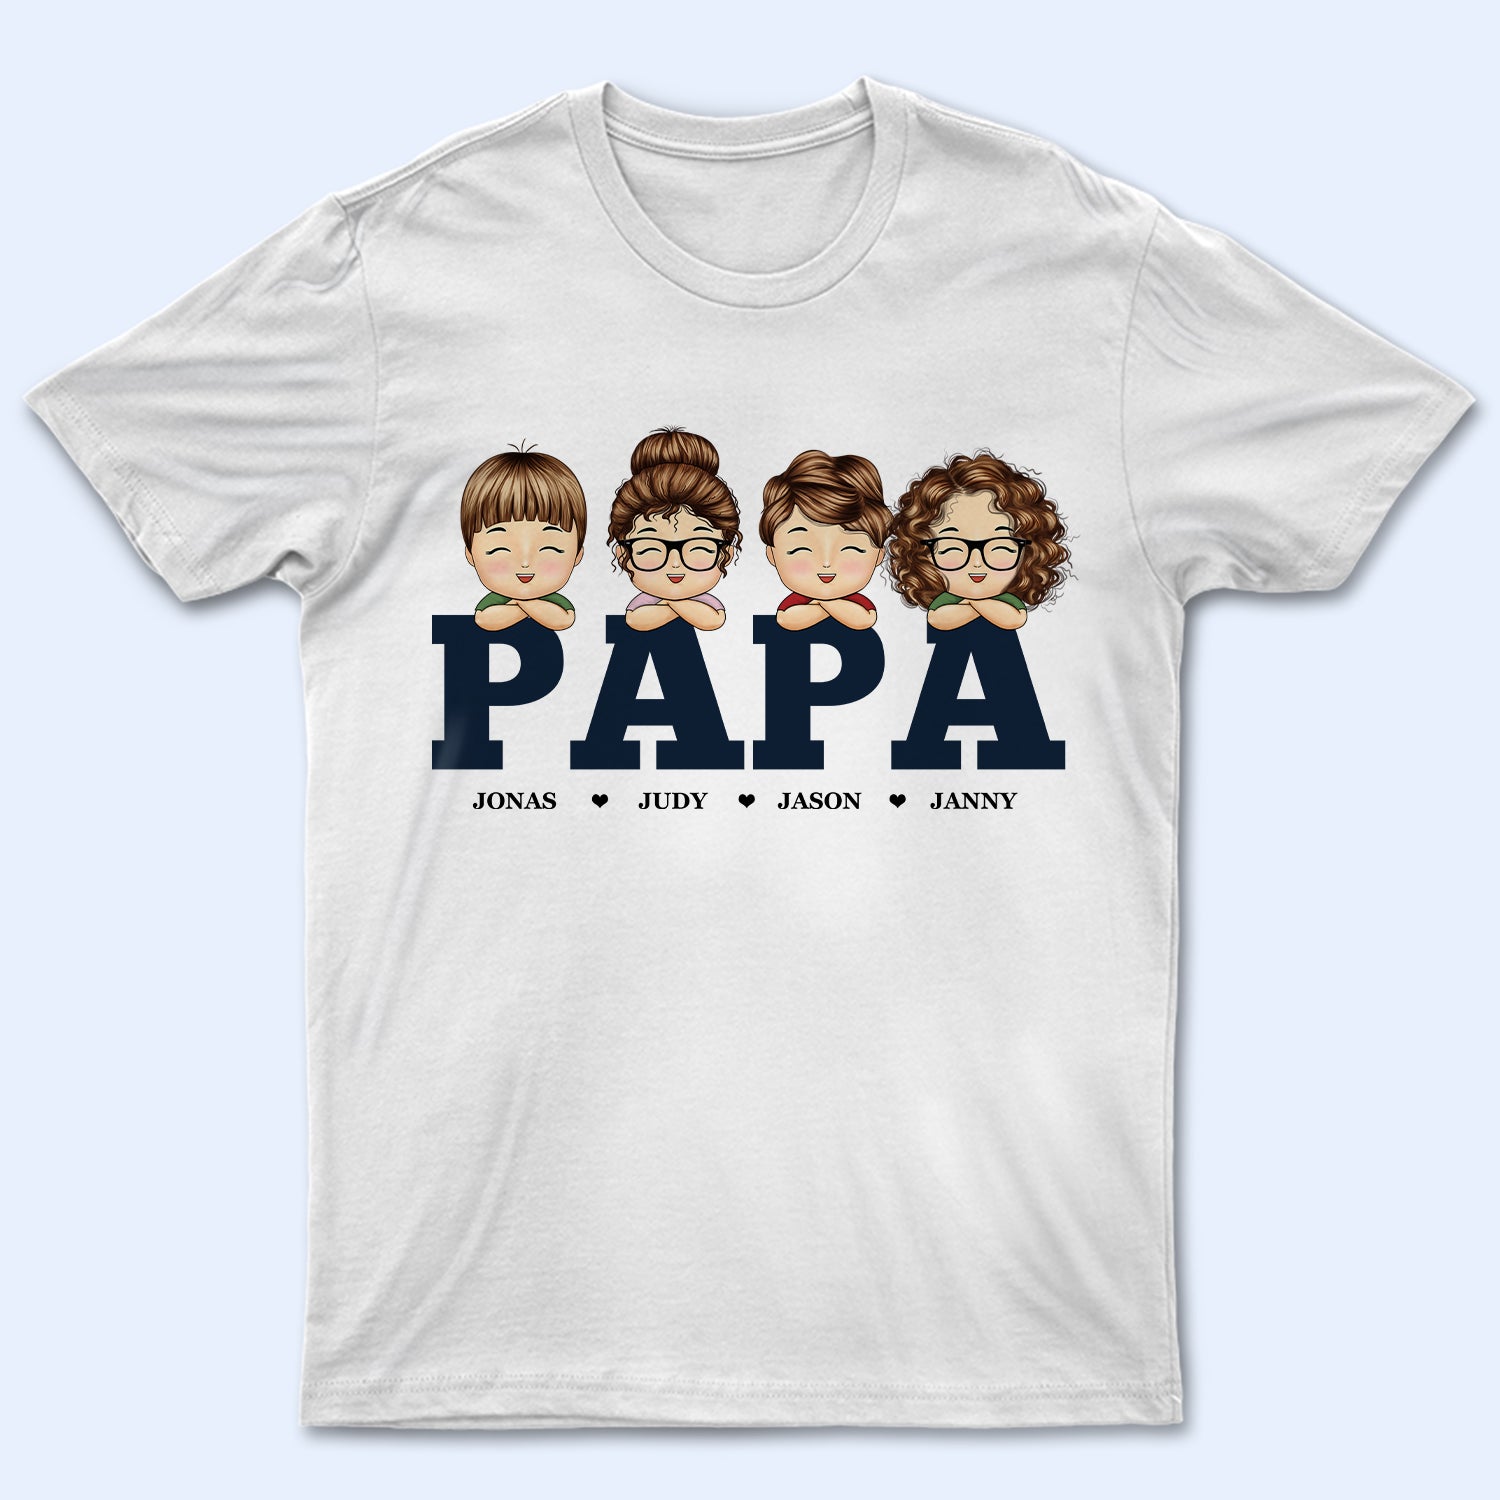 Retro Papa, Grandpa, Dad, Daddy - Birthday, Loving Gift For Father, Grandfather, Mother, Parents - Personalized Custom T Shirt